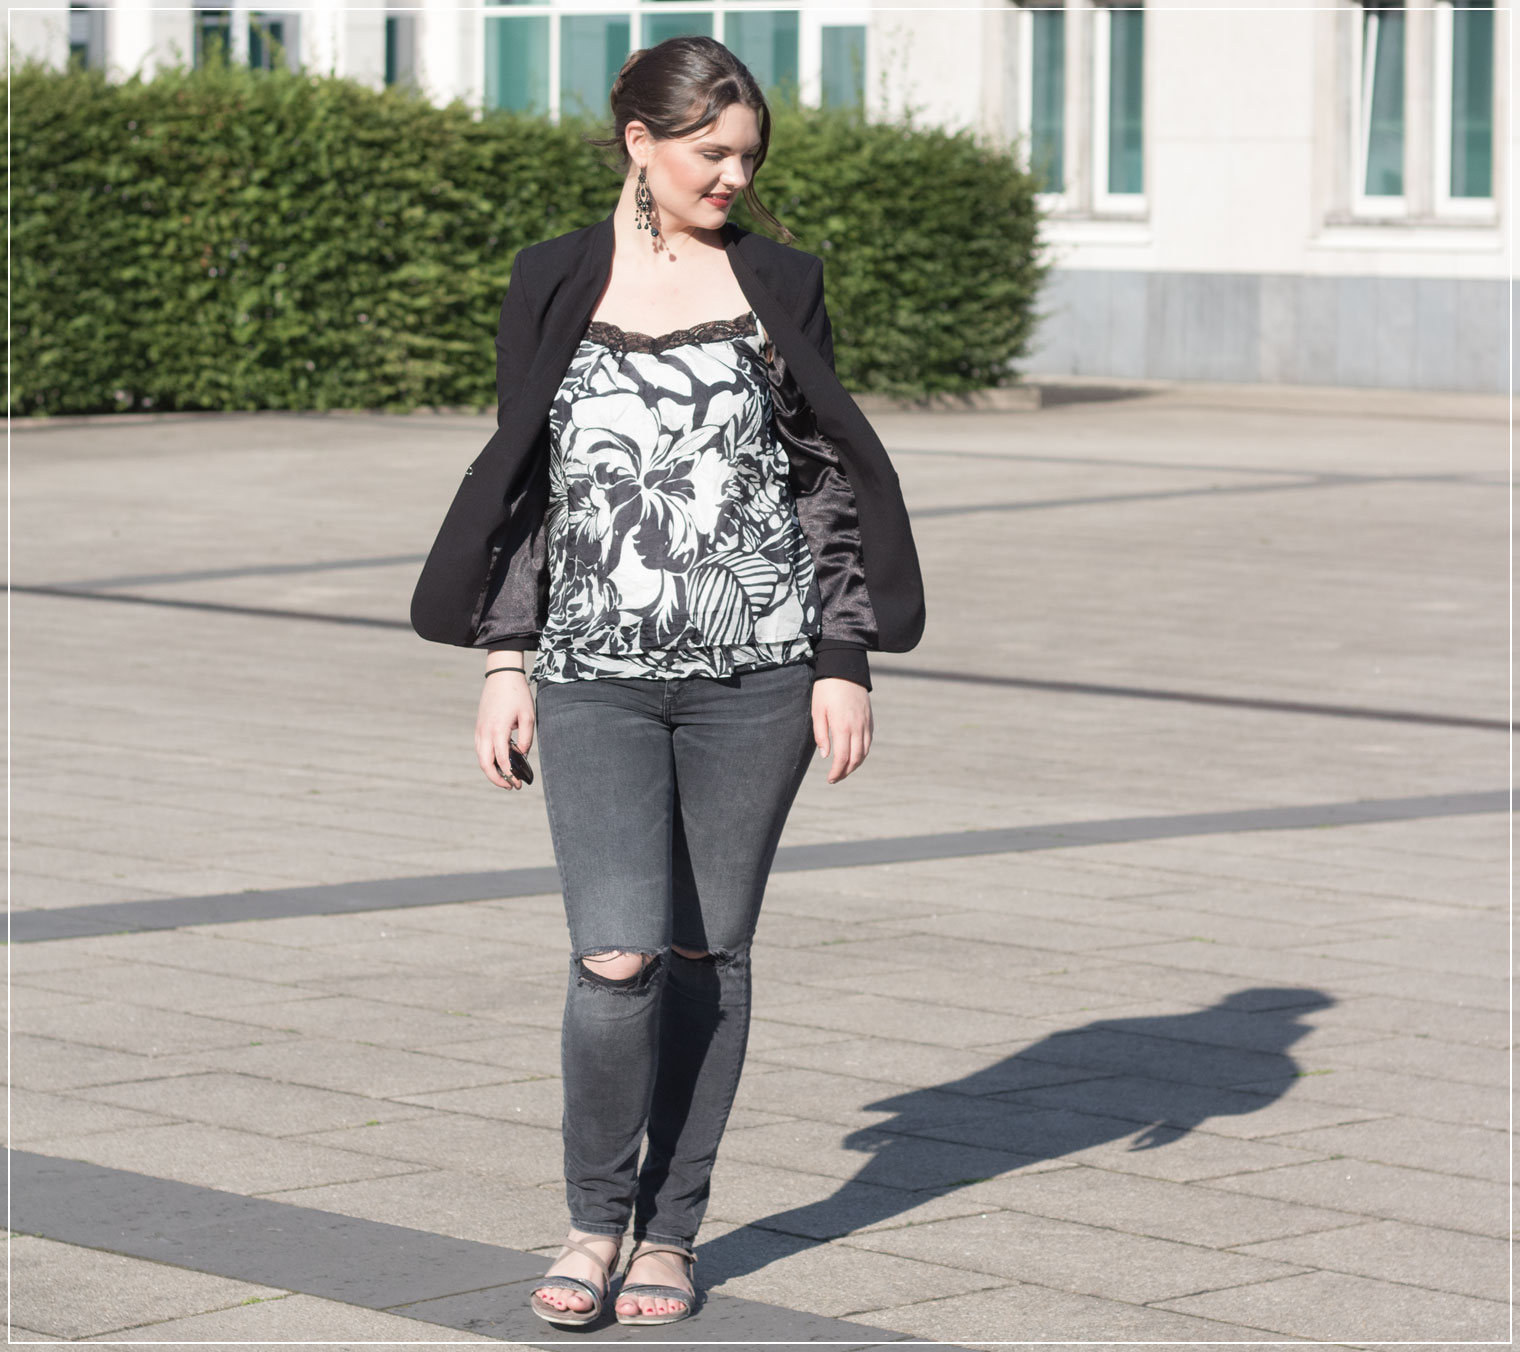 Ripped Jeans, flache Sandalen, Theaterabend, Sommerlook, Sommeroutfit, Eveninglook